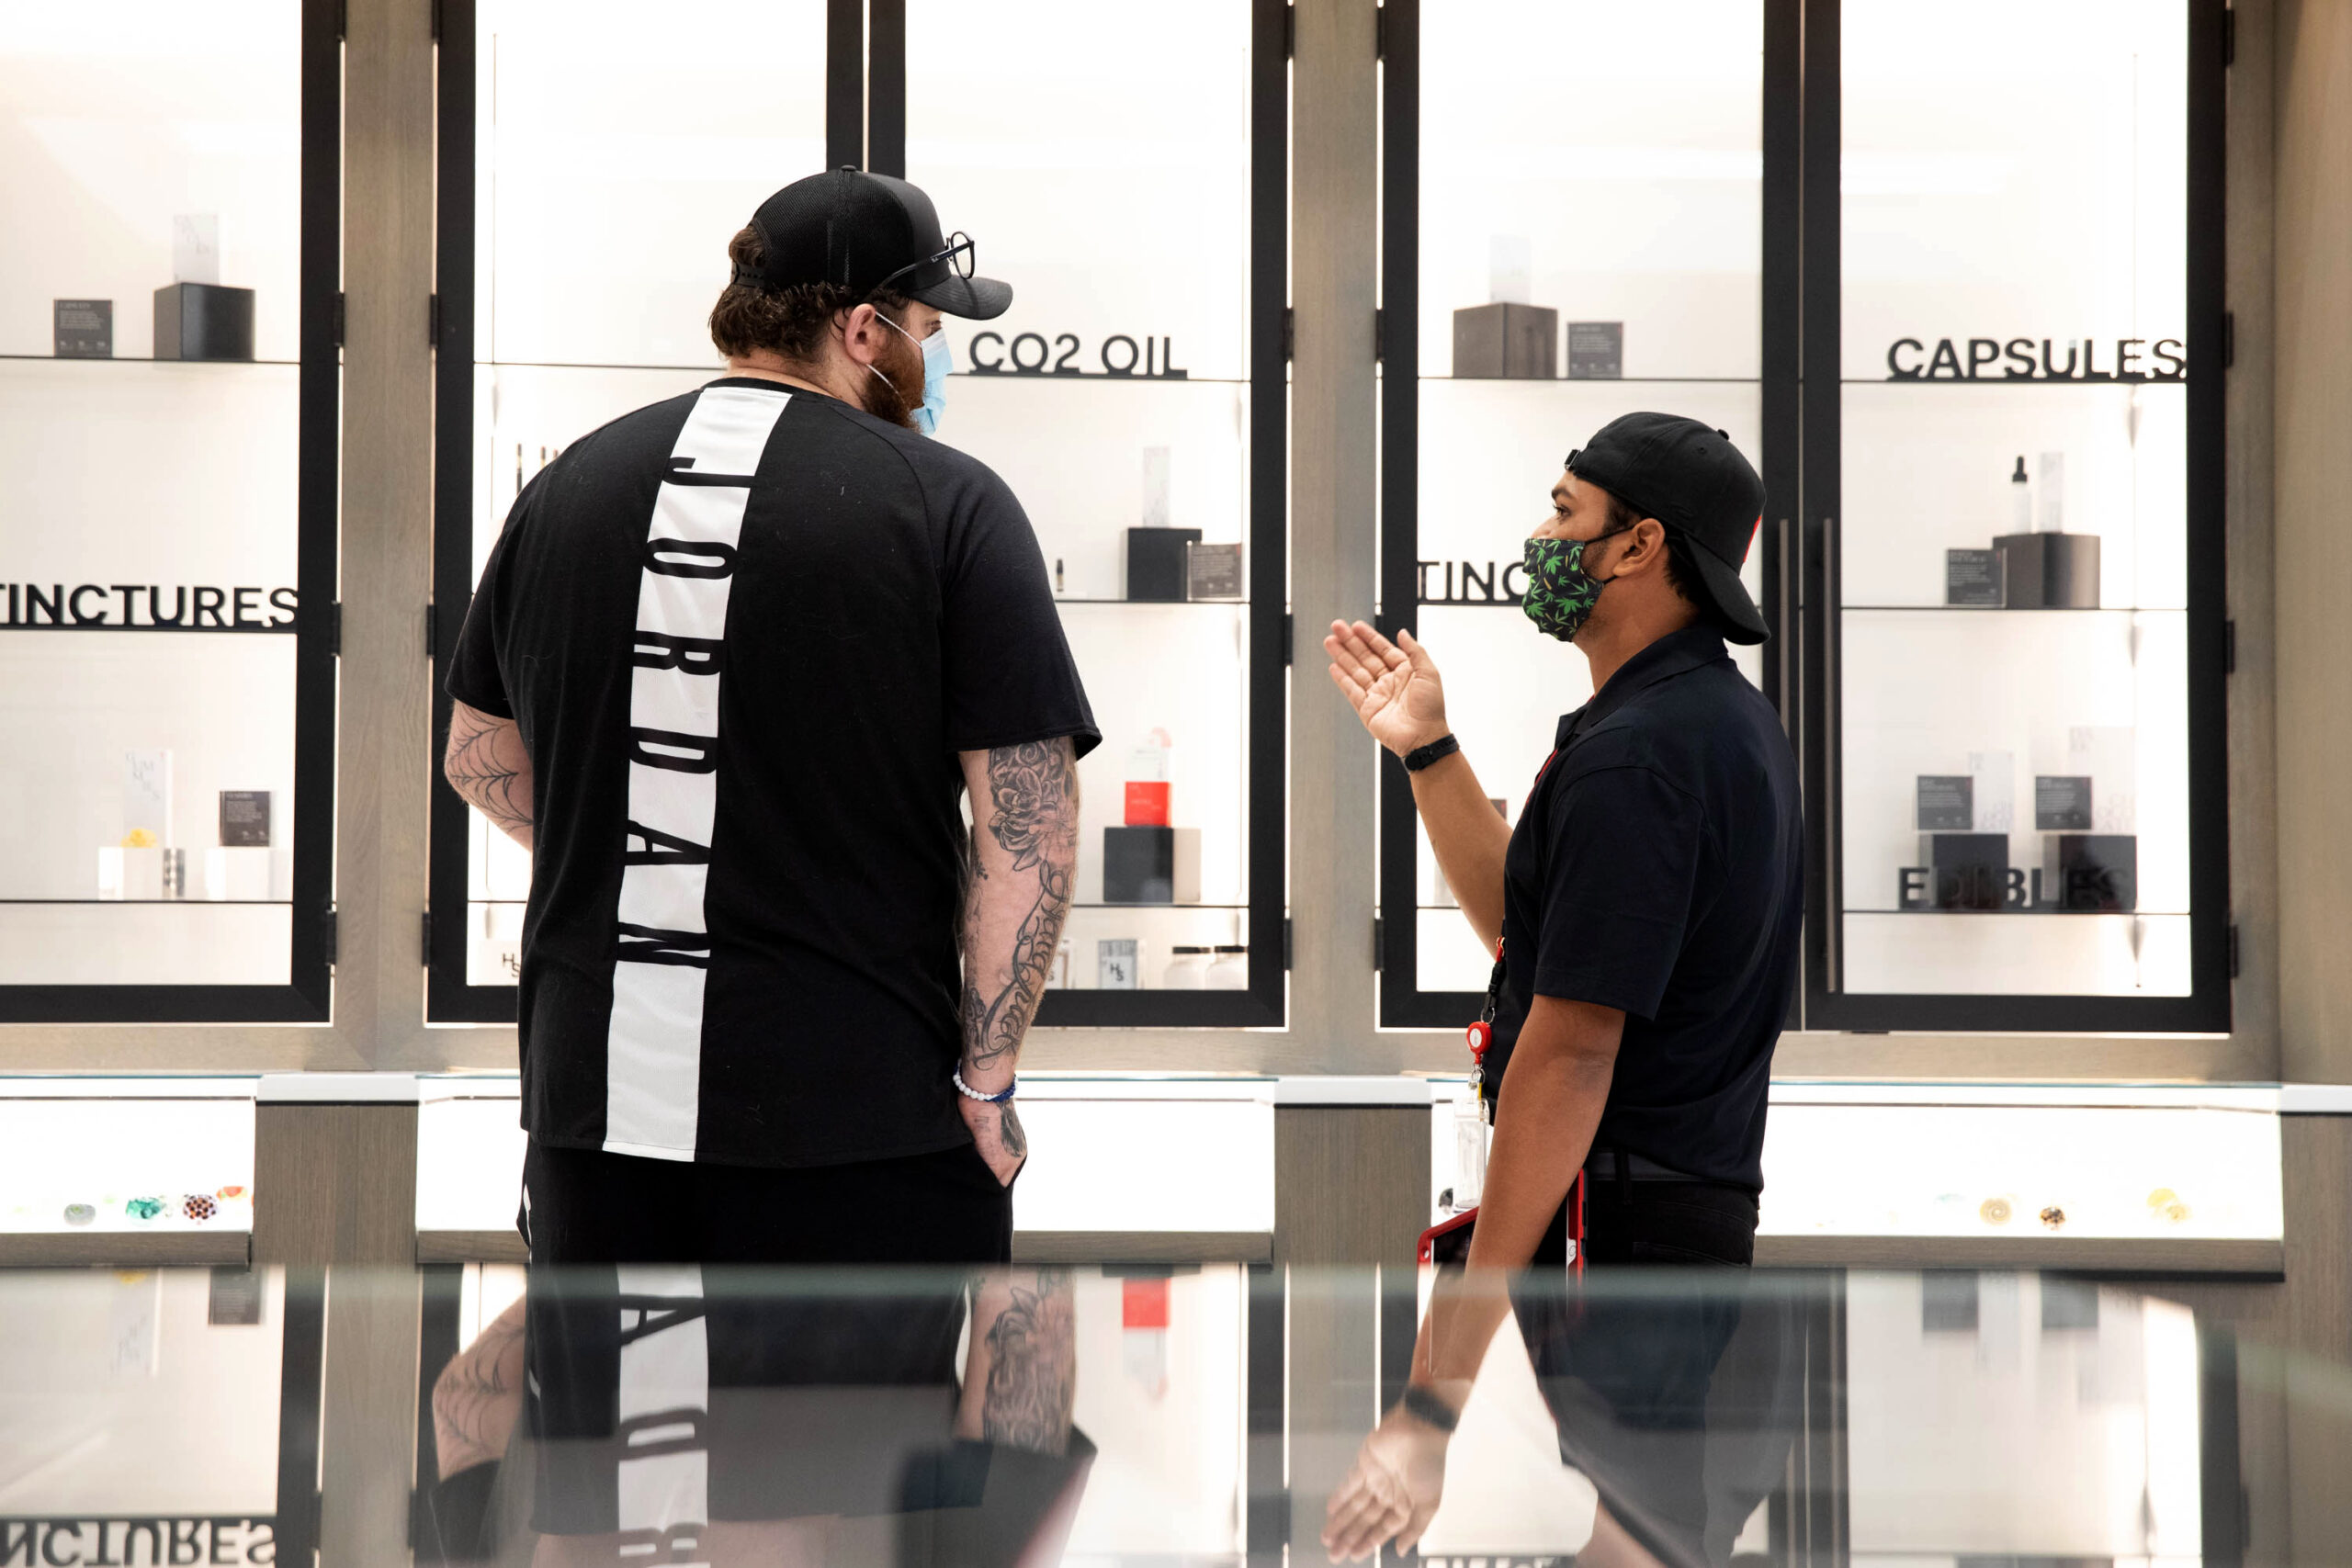 two men talking in front of a dispensary display